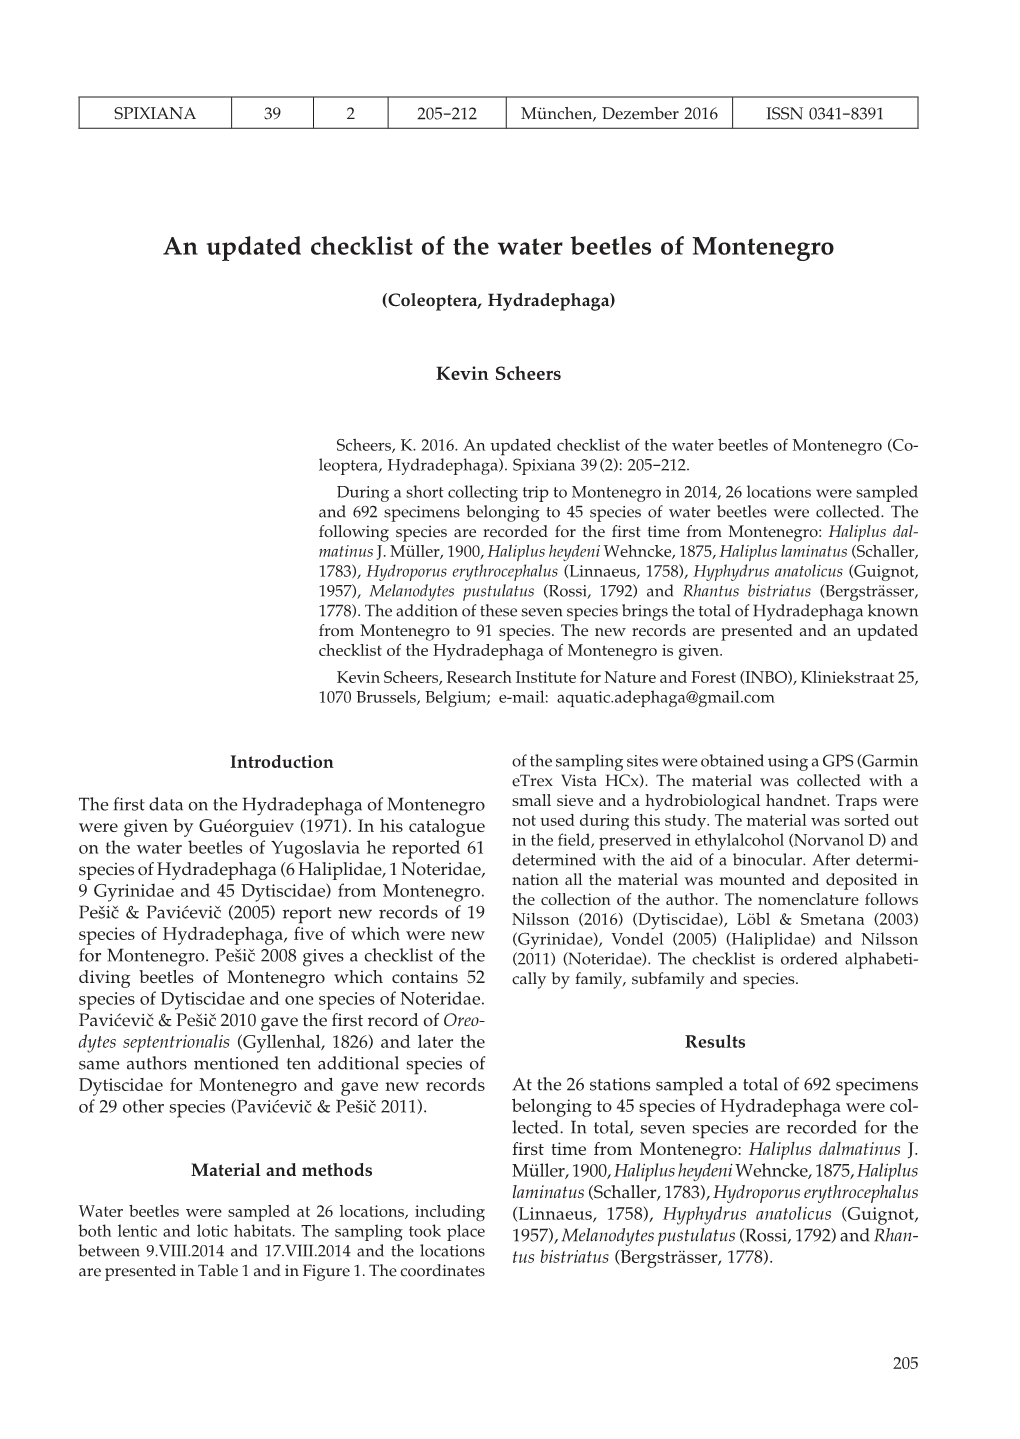 An Updated Checklist of the Water Beetles of Montenegro